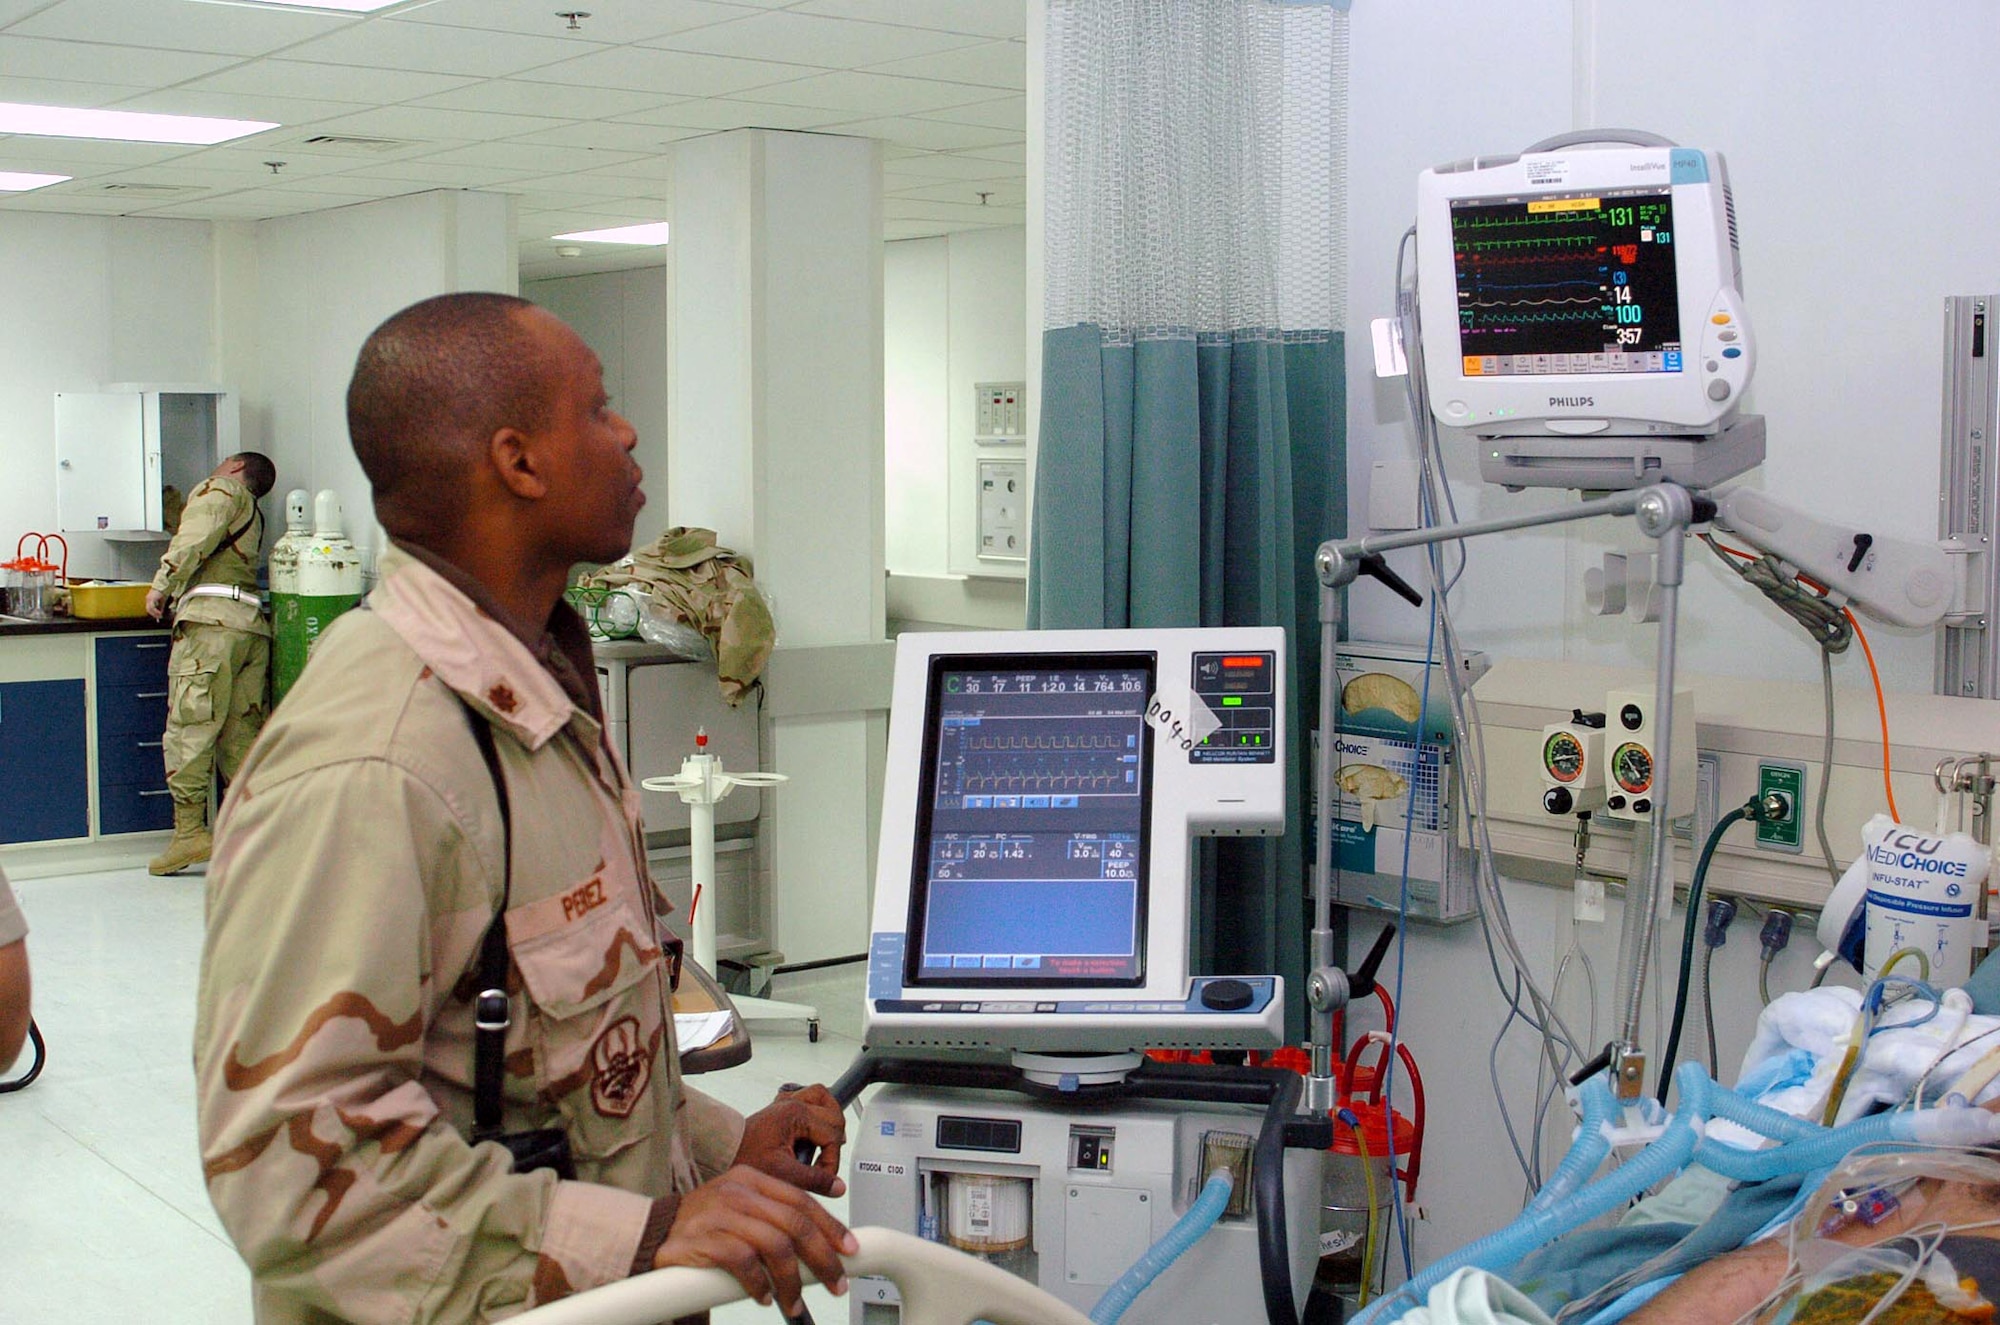 General surgeon Major (Dr.) Clifford Perez uses the new state-of-the-art vital sign monitors to check his patient's condition March 4 at the Craig Joint Theater Hospital, at Bagram Air Base, Afghanistan. The hospital features state- of-the-art technology comparable to that found in stateside hospitals. (U.S. Air Force photo/Staff Sgt. Thomas J. Doscher)
